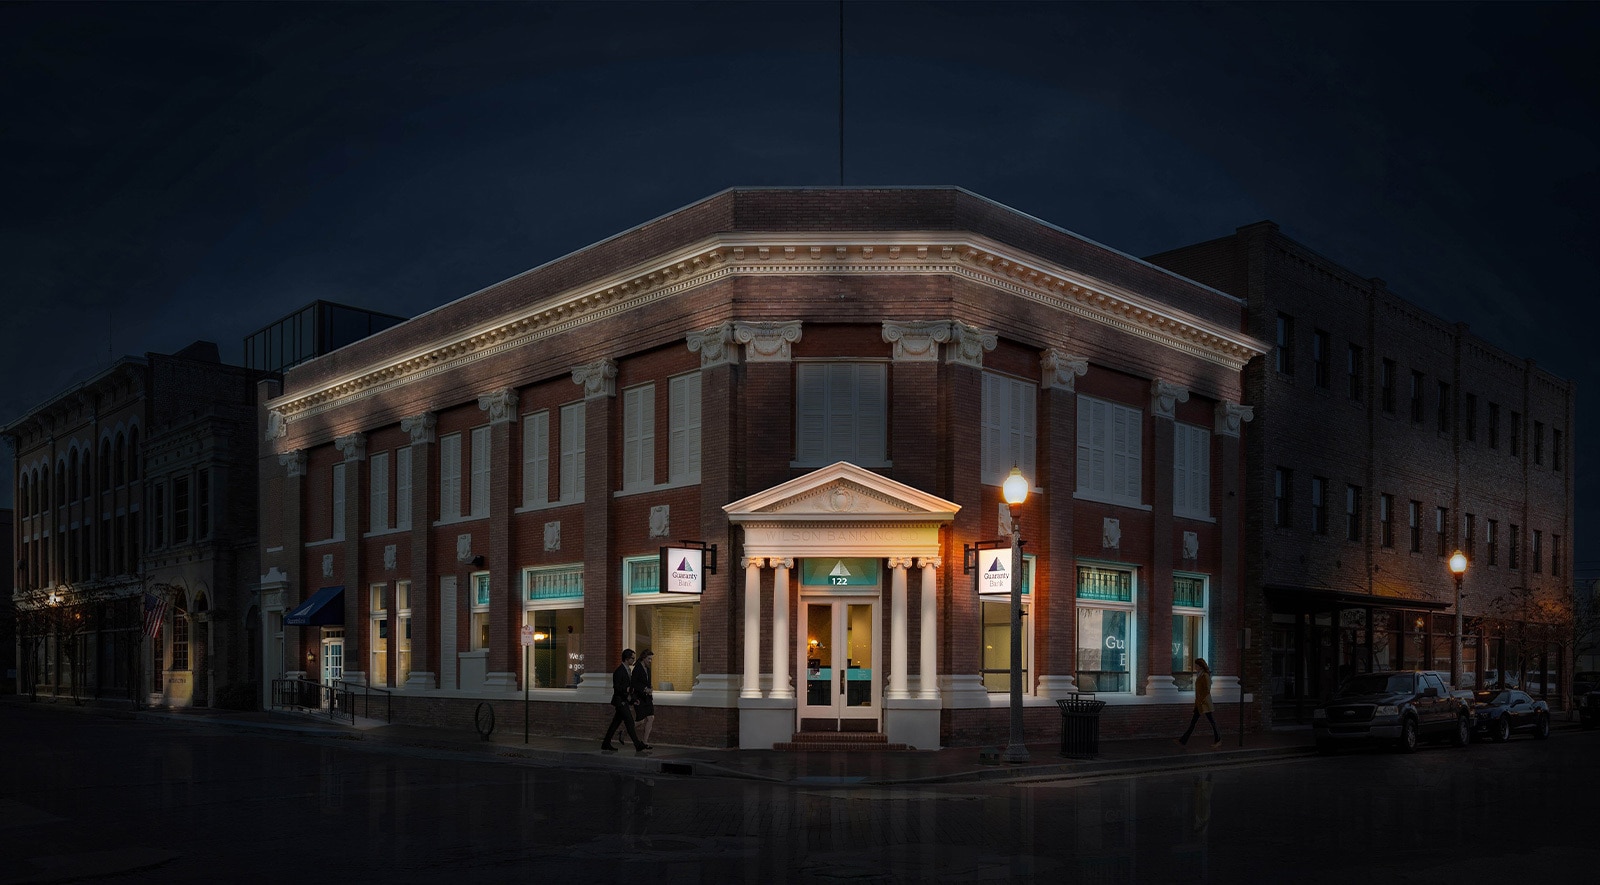 Hero image. Image of a large bank lit with lights in the front at nighttime.